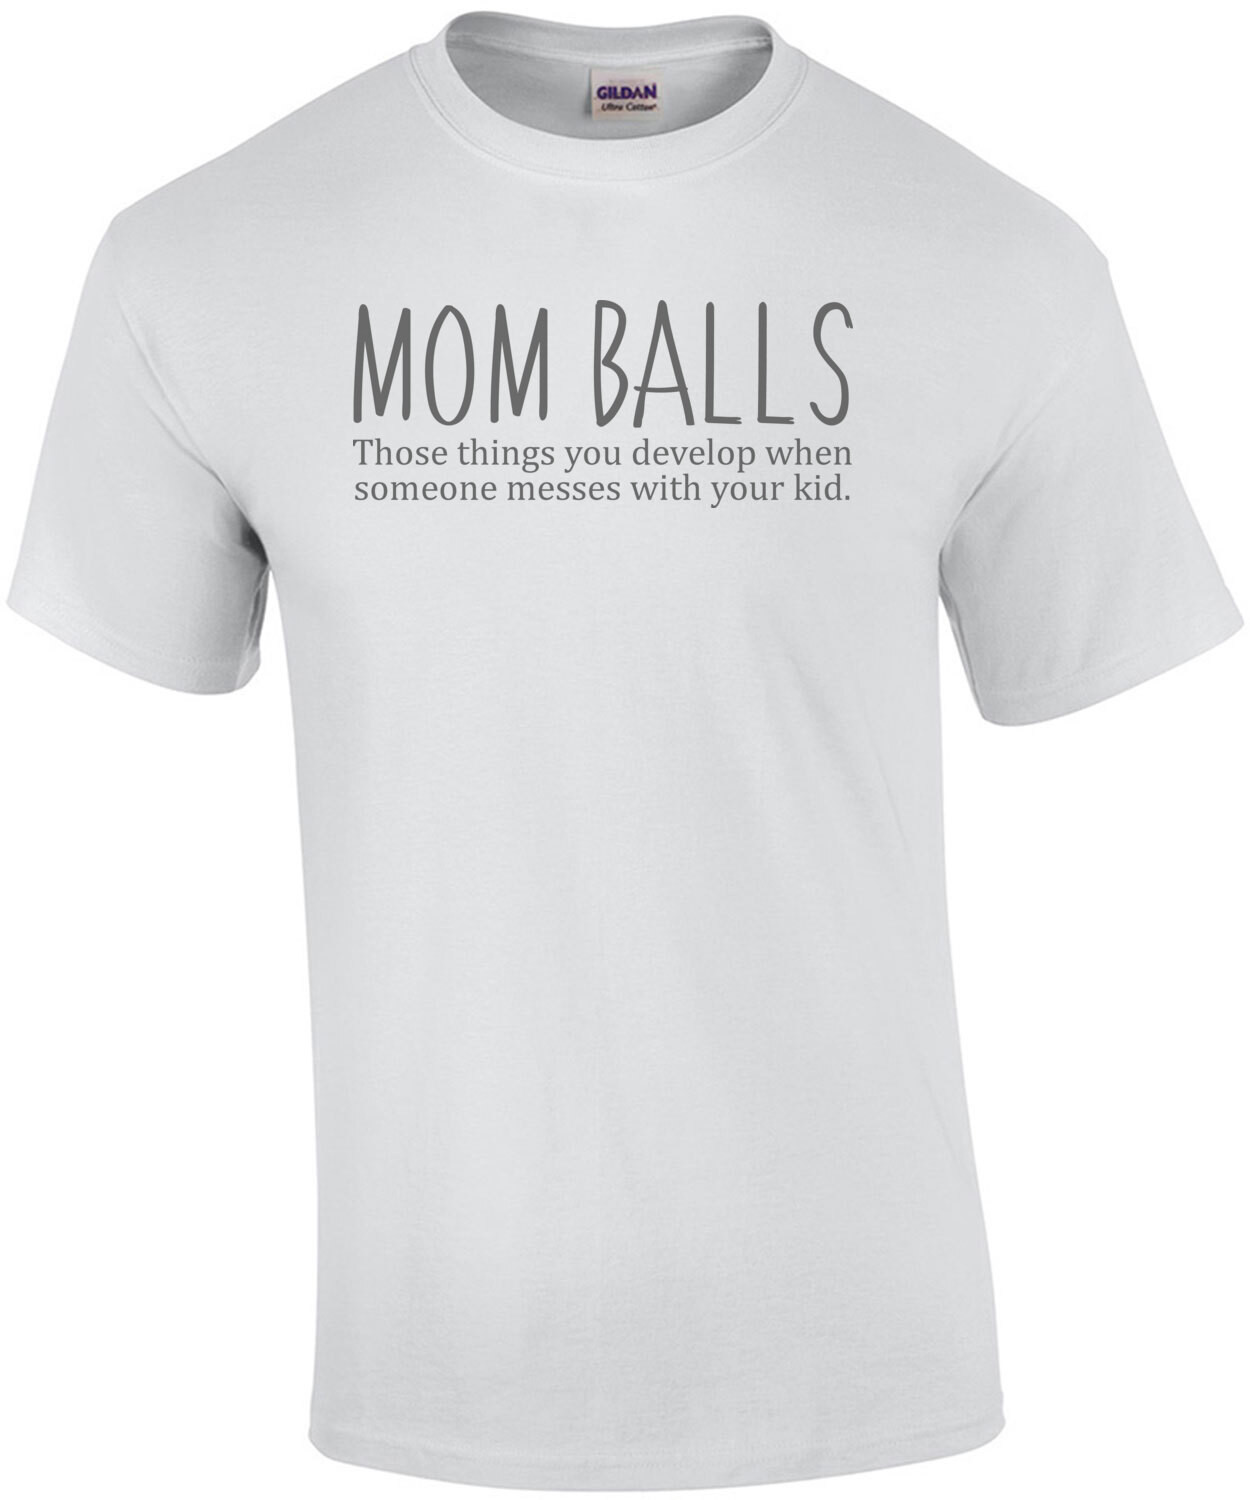 MOM BALLS - Those things you develop when someone messes with your kid - funny mom t-shirt